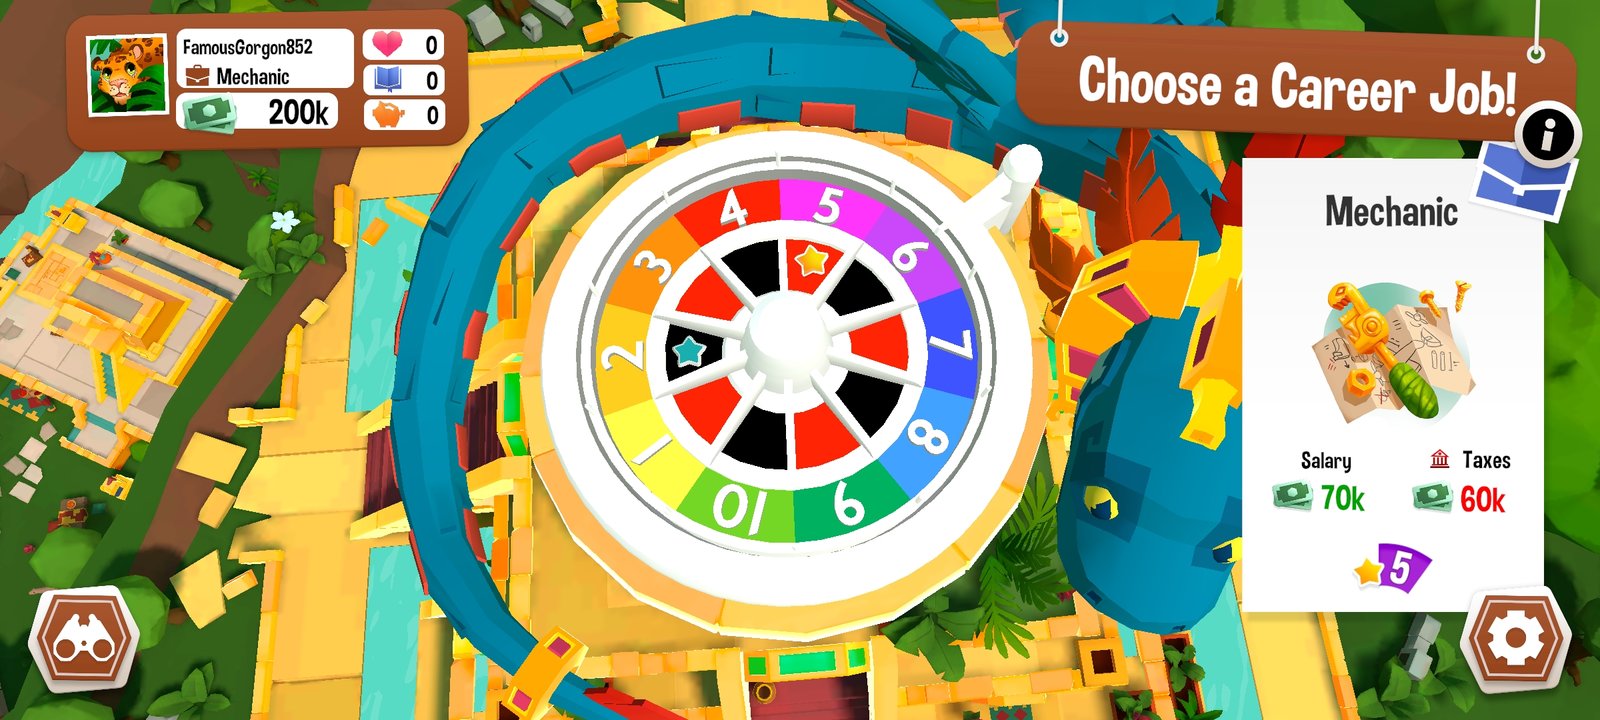 The Game of Life 2 MOD APK (Unlocked)